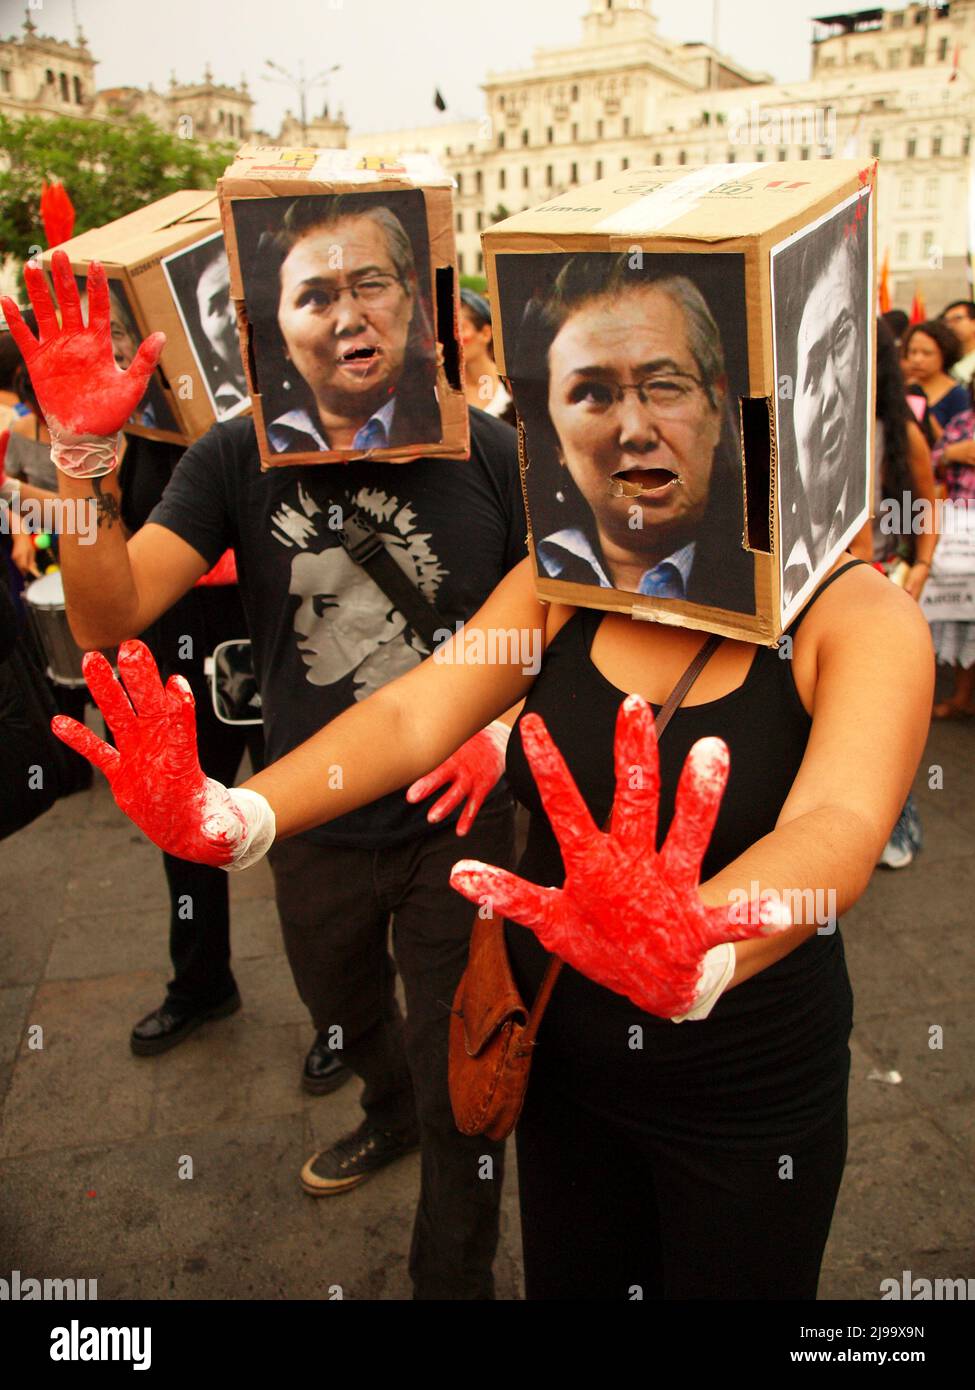 Hundreds of activists, costumed as Alberto Fujimori showing their bloody hands, took by force the main square of Lima, in the aniversary of the coup d'etat of Alberto Fujimori. The demonstrators demanded for non oblivion and no impunity for the responsibles thousands of disappeared, forced sterilizations, corruption, and trimming of civil liberties during the Fujimori government. Stock Photo